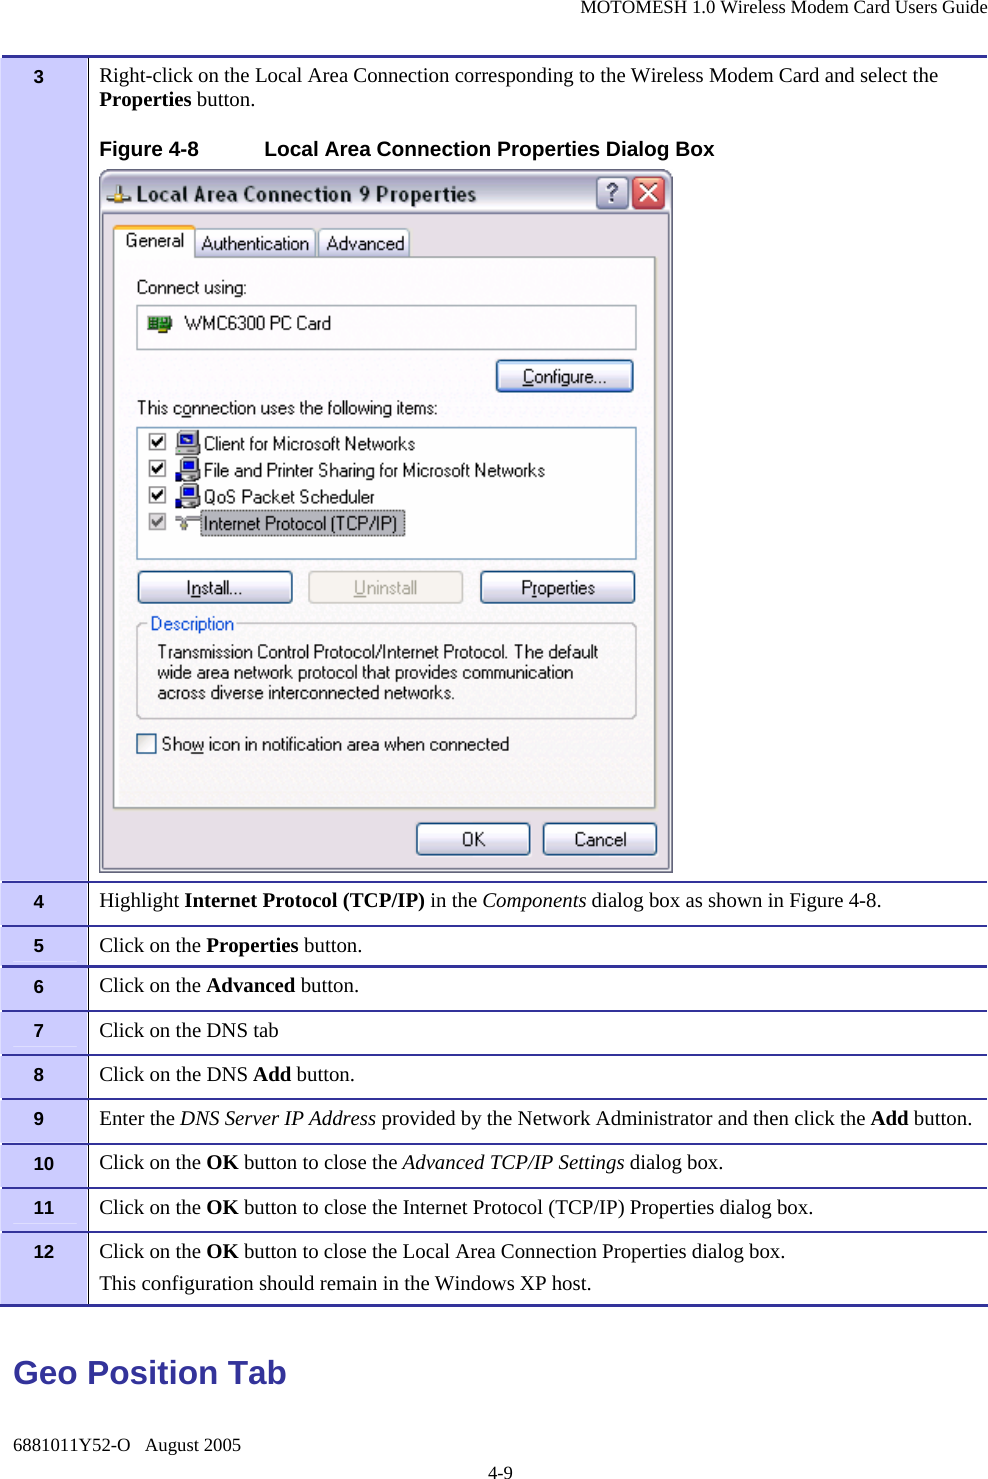 MOTOMESH 1.0 Wireless Modem Card Users Guide 6881011Y52-O   August 2005 4-9 3   Right-click on the Local Area Connection corresponding to the Wireless Modem Card and select the Properties button. Figure 4-8  Local Area Connection Properties Dialog Box  4   Highlight Internet Protocol (TCP/IP) in the Components dialog box as shown in Figure 4-8. 5   Click on the Properties button. 6   Click on the Advanced button. 7   Click on the DNS tab 8   Click on the DNS Add button. 9   Enter the DNS Server IP Address provided by the Network Administrator and then click the Add button. 10  Click on the OK button to close the Advanced TCP/IP Settings dialog box. 11  Click on the OK button to close the Internet Protocol (TCP/IP) Properties dialog box. 12  Click on the OK button to close the Local Area Connection Properties dialog box. This configuration should remain in the Windows XP host. Geo Position Tab 